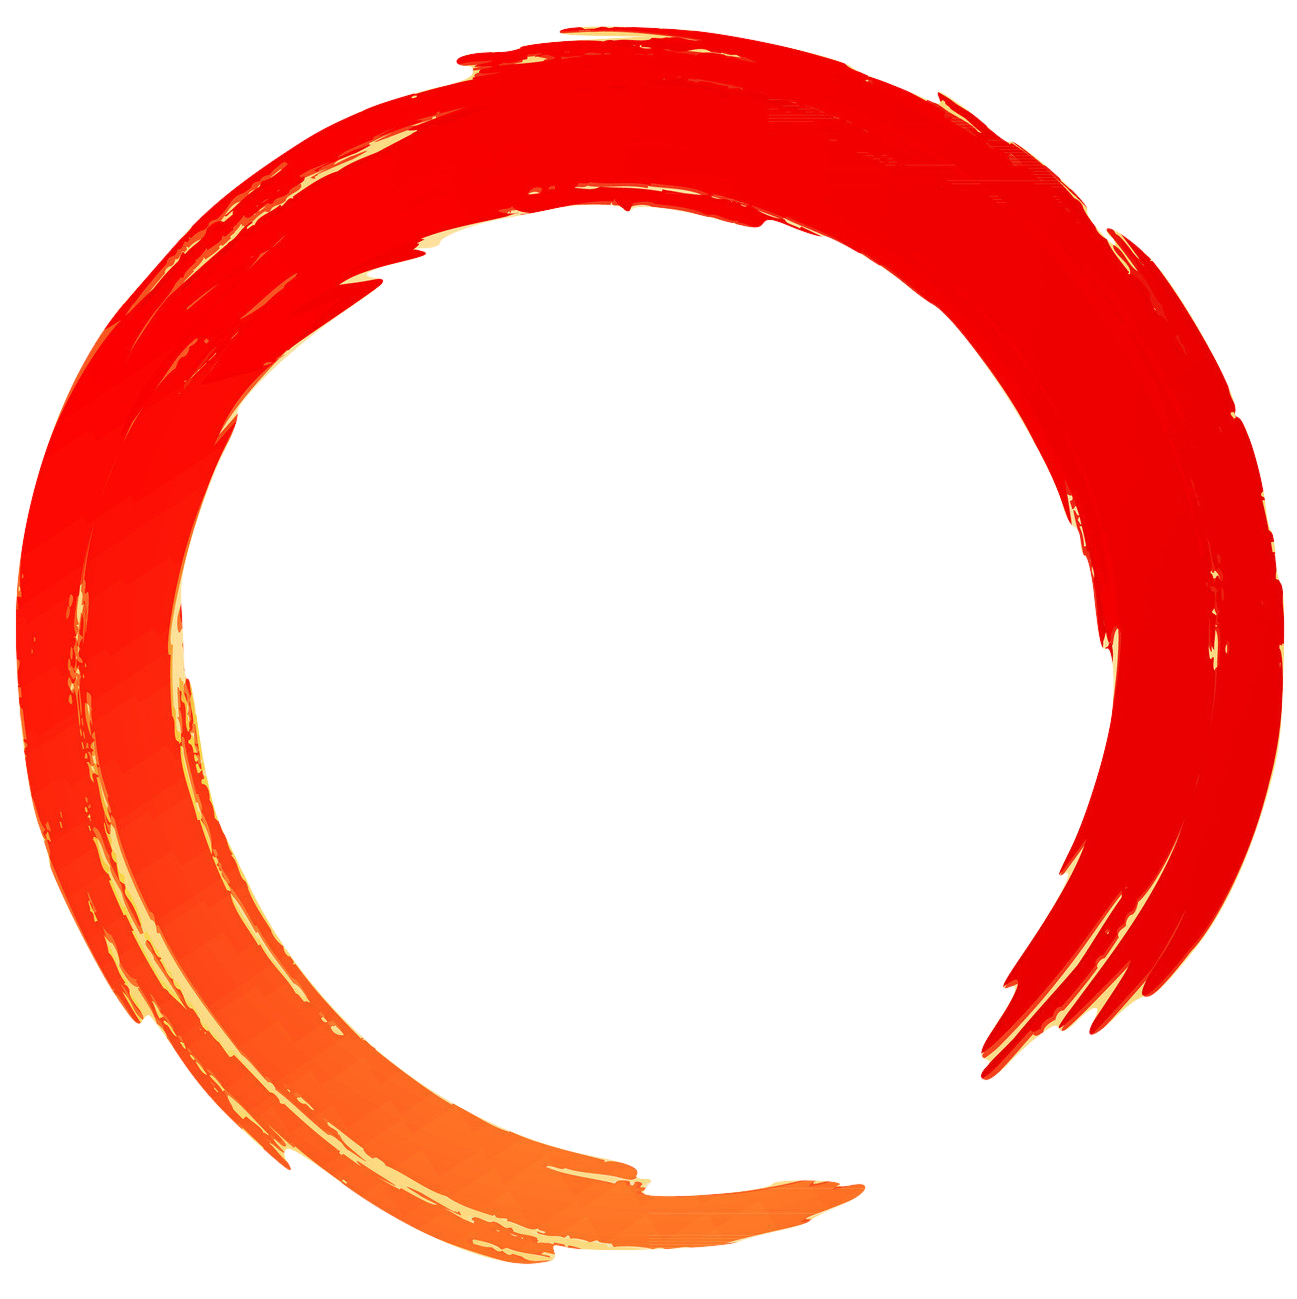 Red Circle Transparent Background Png : Circle Red Transparent ...